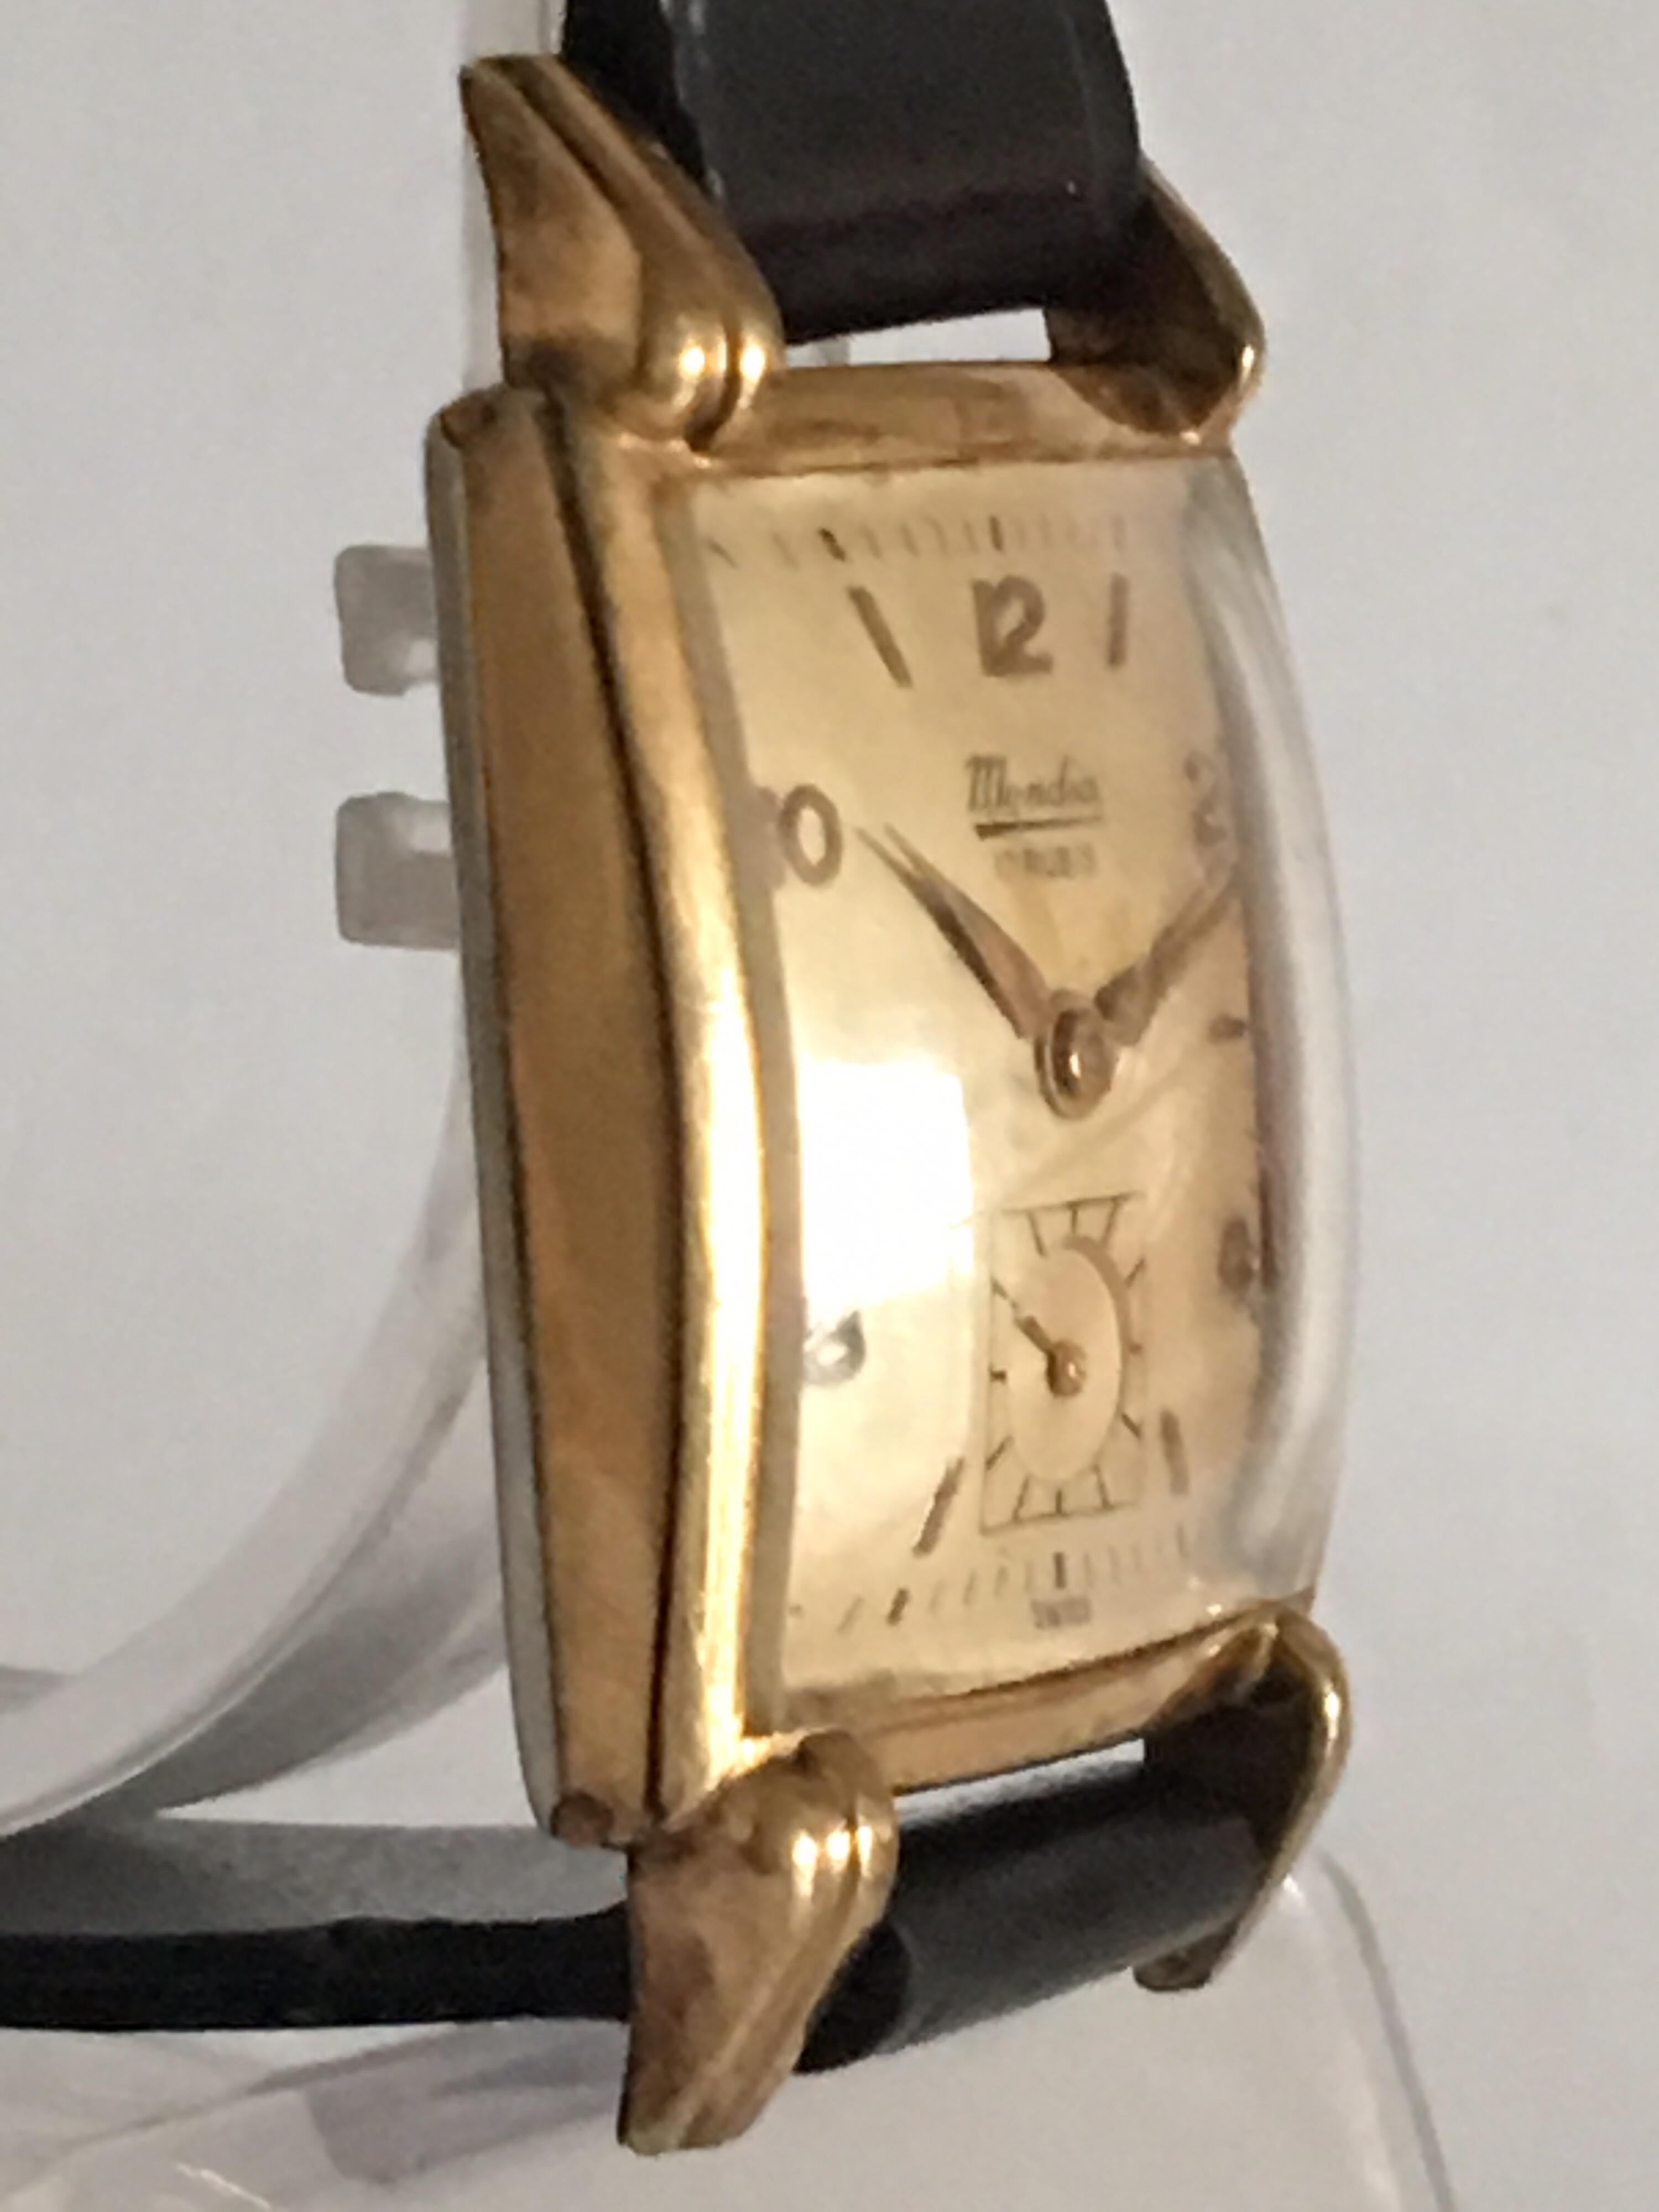 This Vintage watch is working and ticking well. 
Visible scratch on the middle of top glass and some marks on the dial. 
Please study the images carefully as form part of the description.